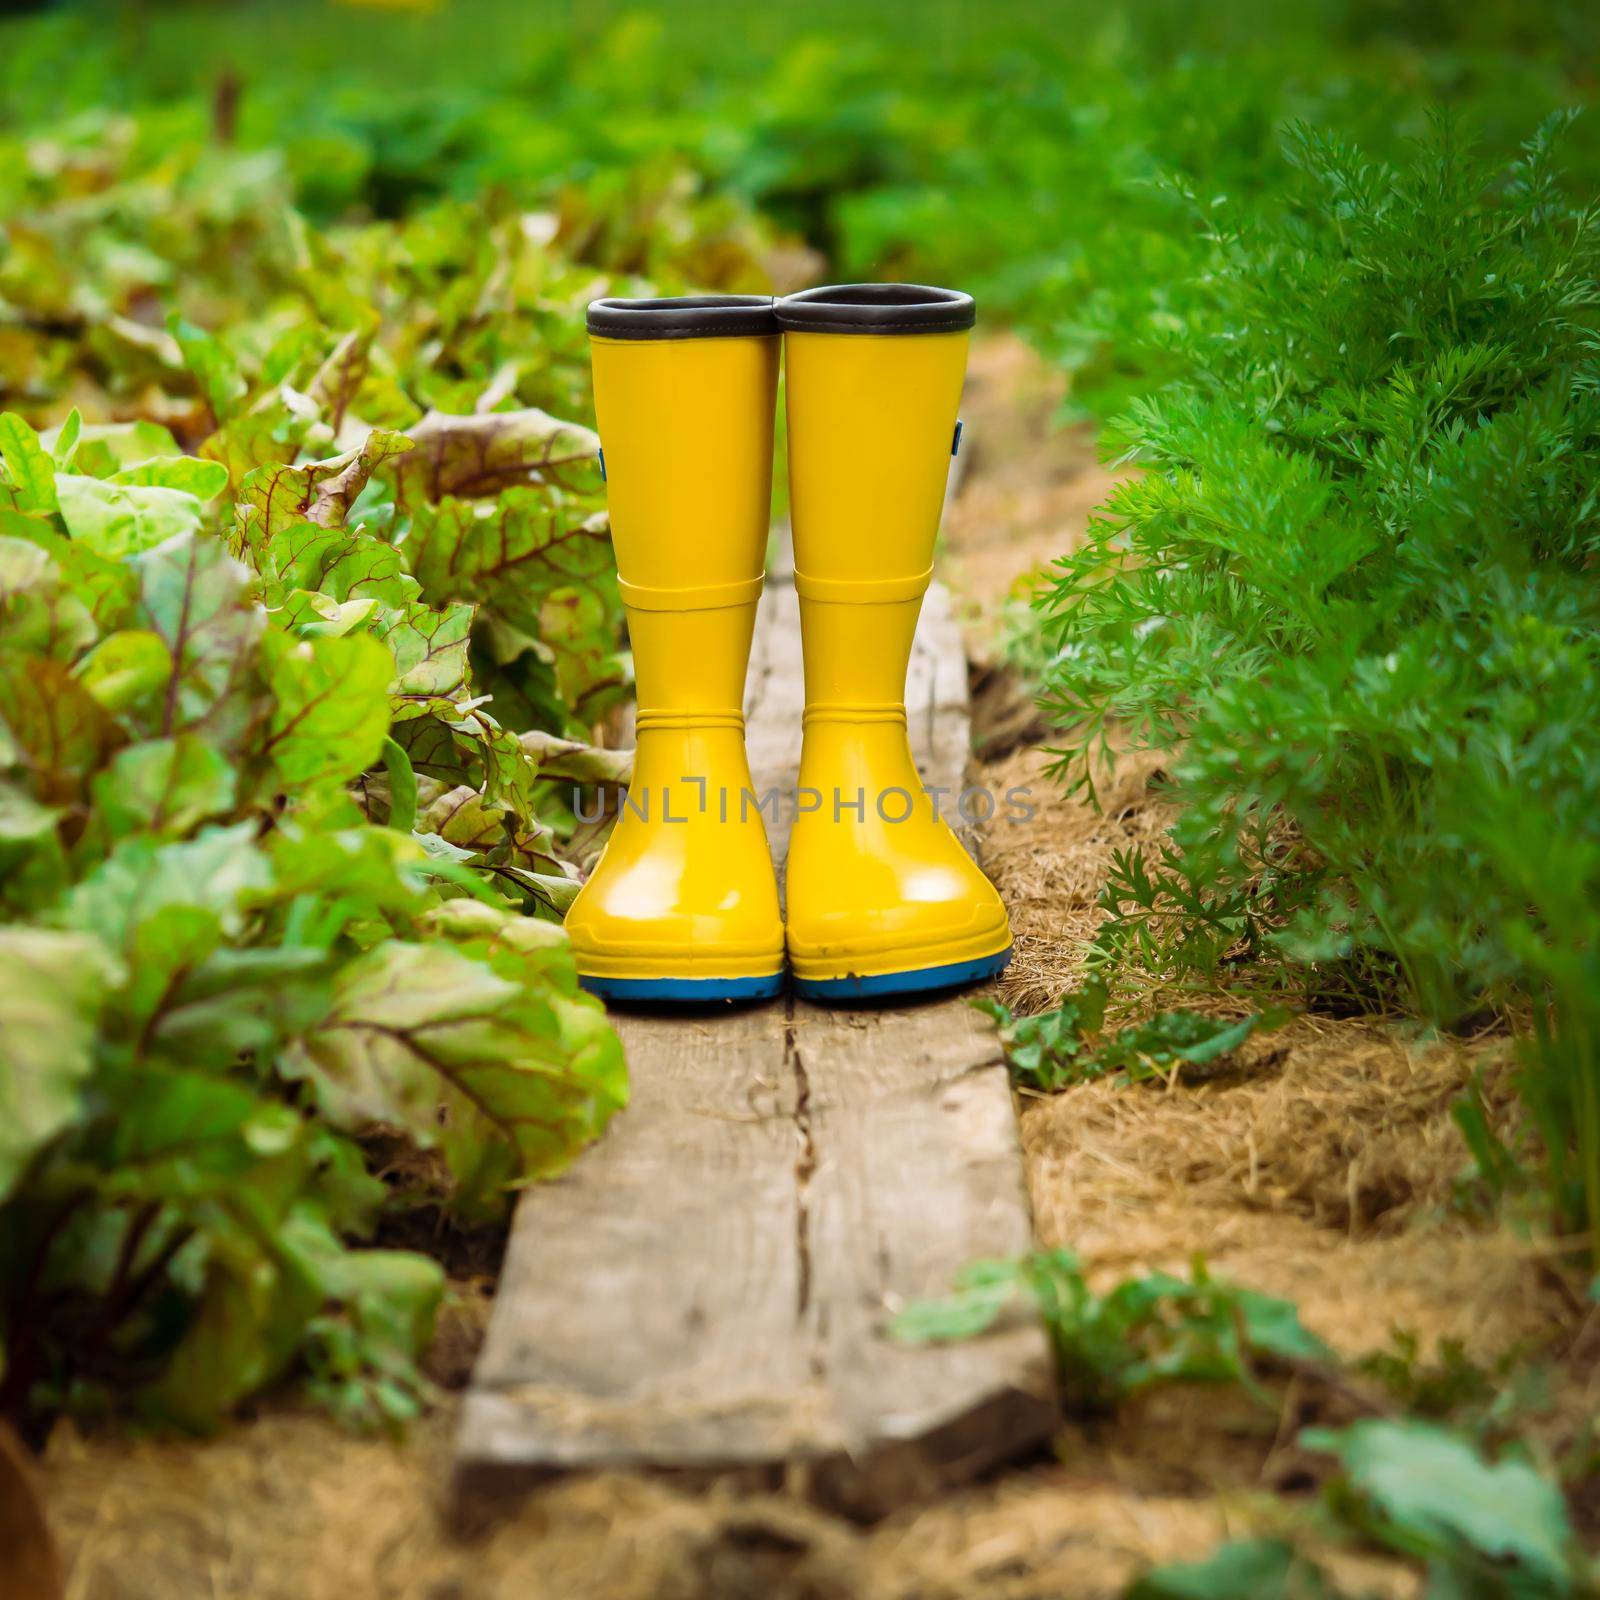 A closeup of yellow rubber boots in a green beautiful garden. by africapink